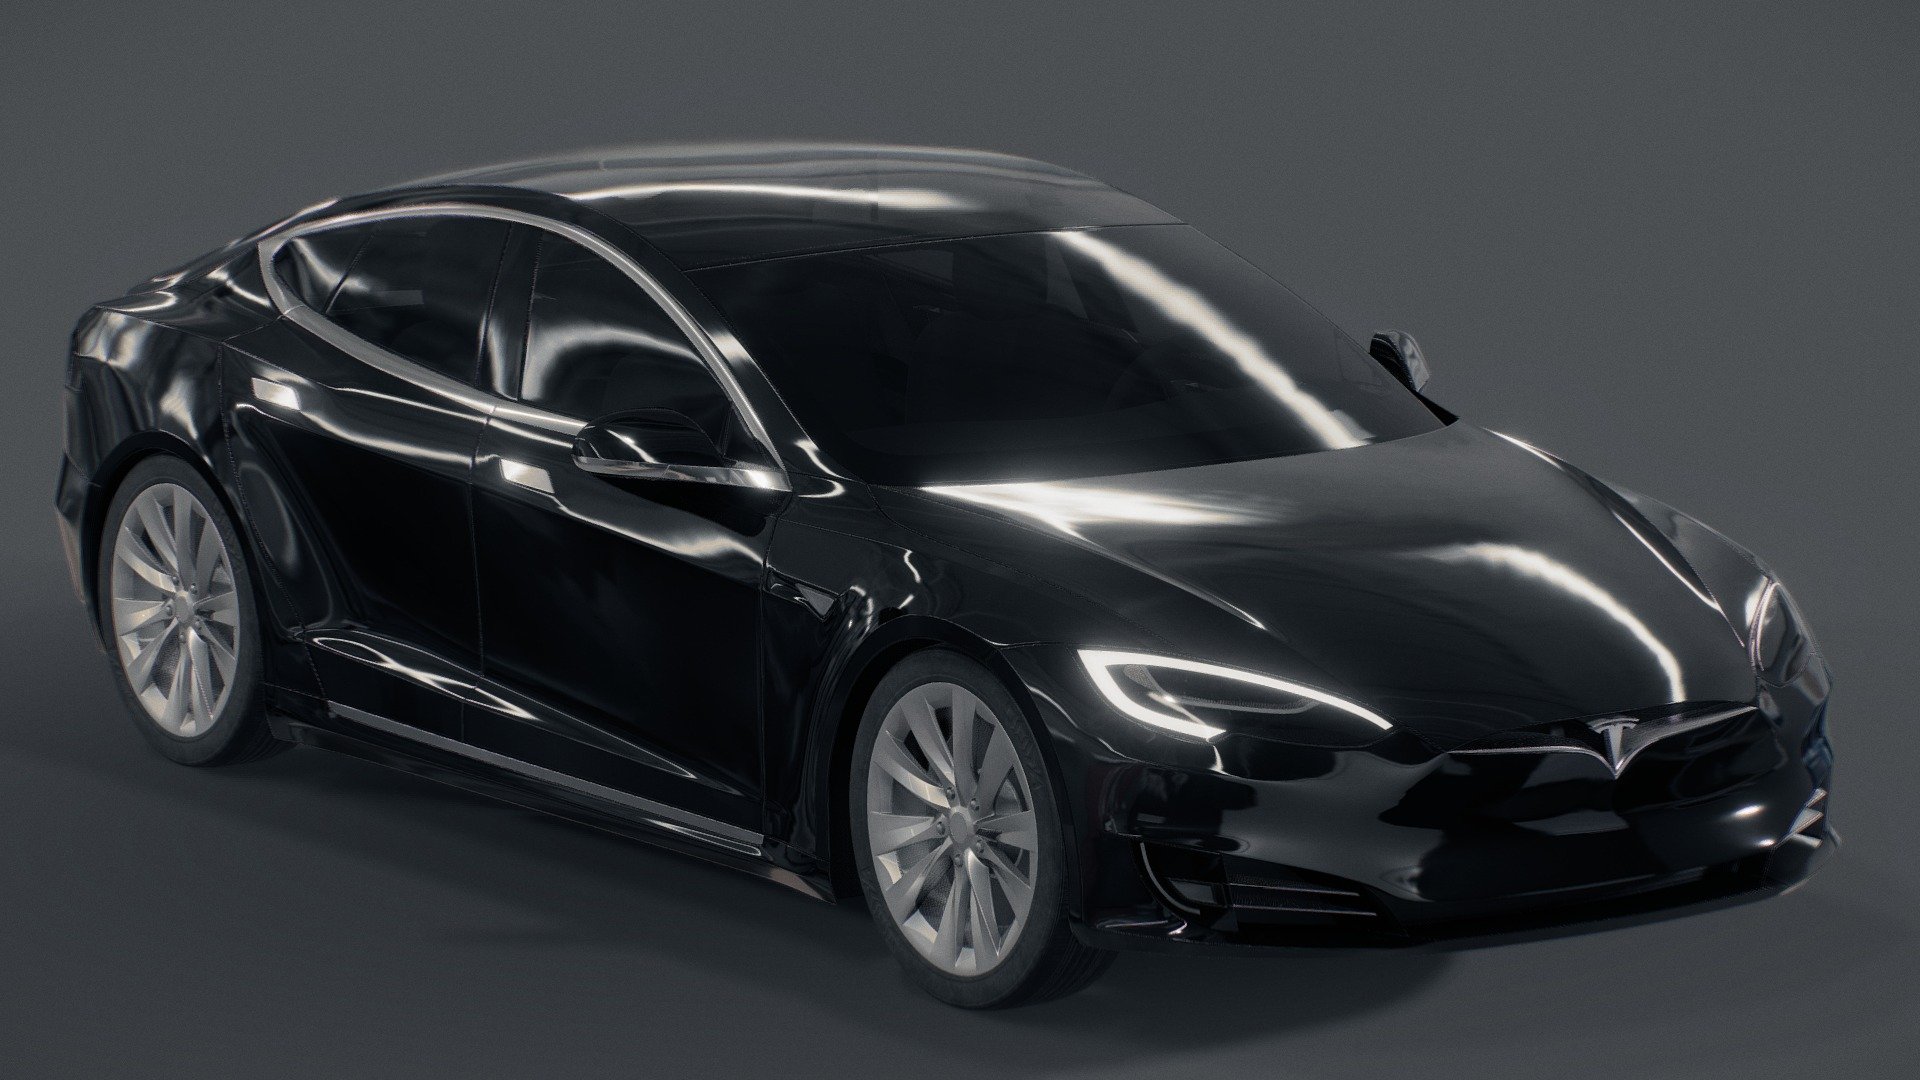 this tesla model s was professionally modeled to look as close to the real life car as possible. it has a PBR material with 8K textures including: diffuse, roughness, normal, metallic, clearcoat, transmission, emission, and alpha. all parts of this car are separate and can be individually moved and rigged/animated (opening the doors, door handles, etc.). disclaimer: the interior is only a low detail dummy and is not accurate to the real thing 3d model